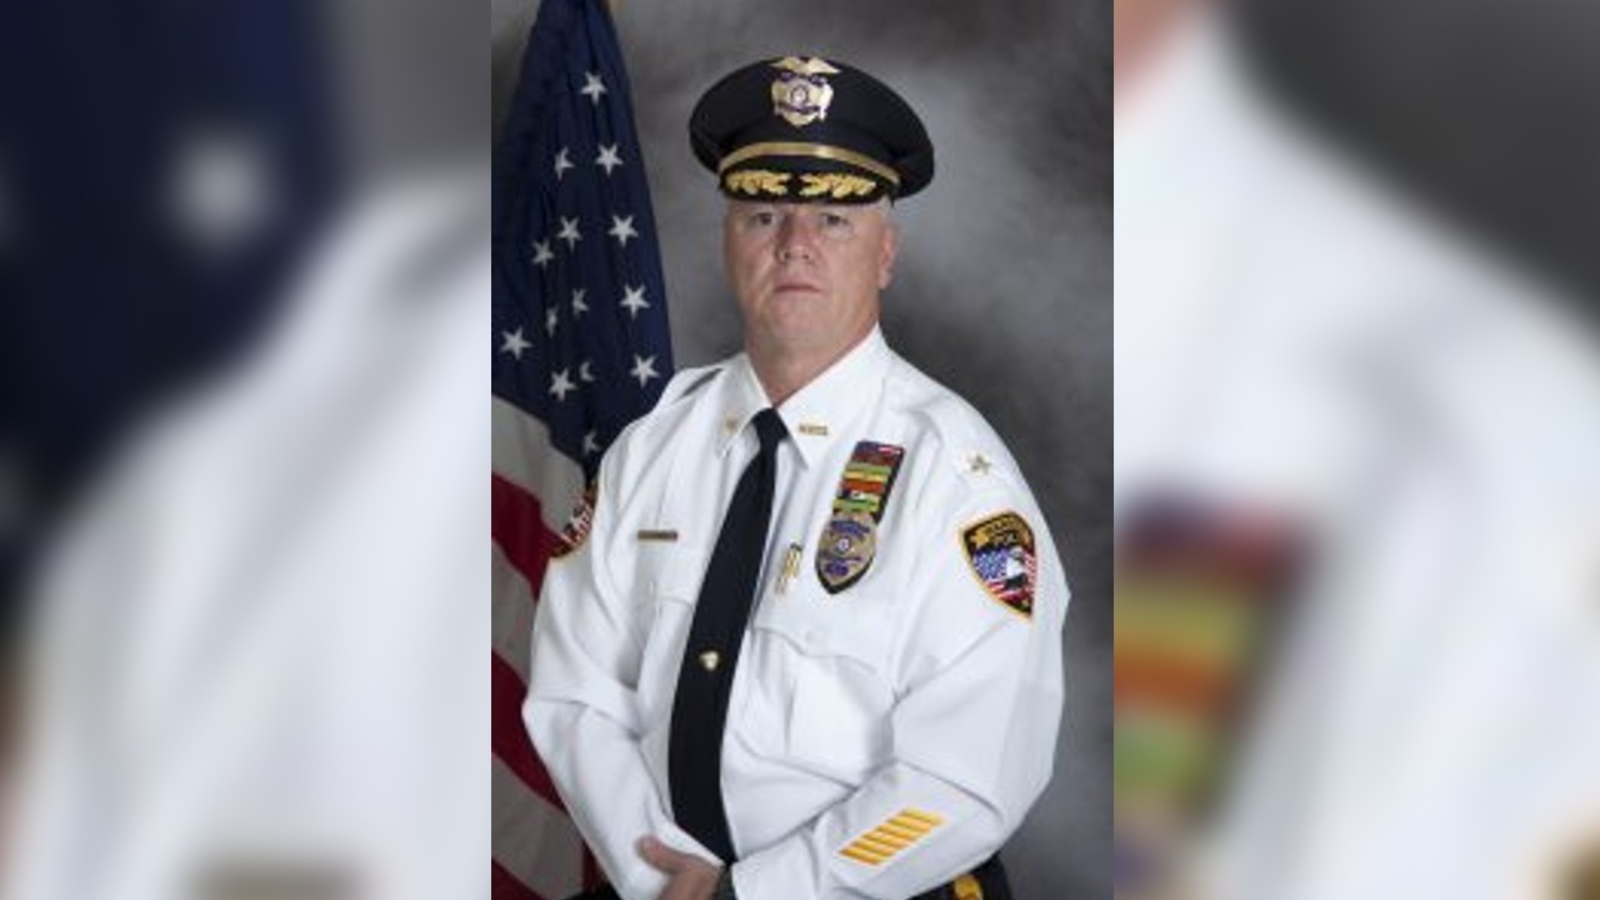 Suspended NJ police chief arrested, charged with sexual assault